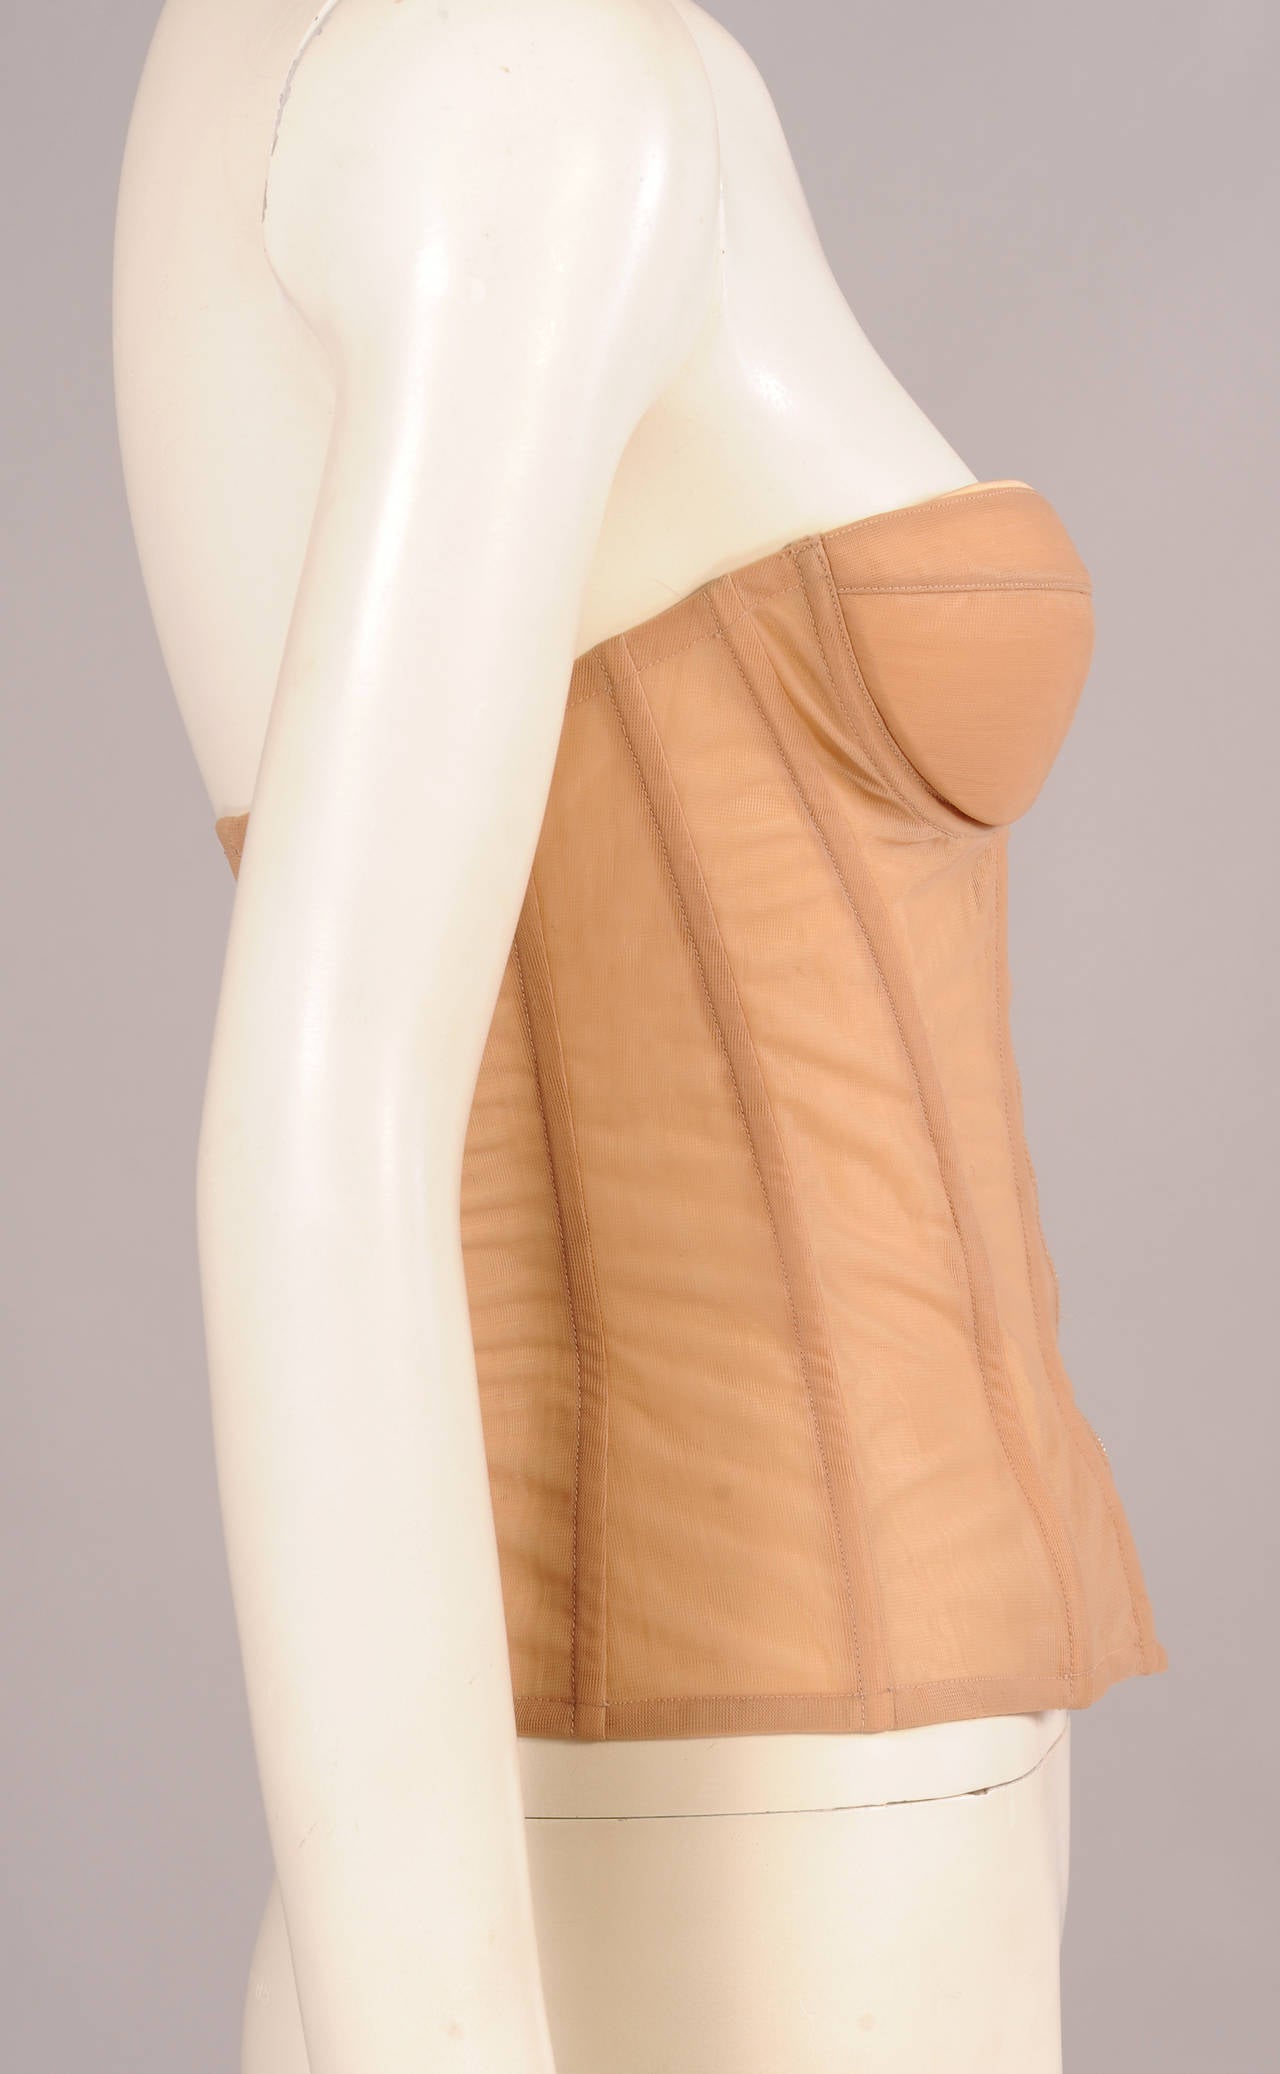 This nude bustier was worn on the Chanel Haute Couture runway by the model Chrystelle. it has a center front zipper and lightly padded, silk lined underwire cups. The center back panel is made from a stretch fabric. It is in excellent